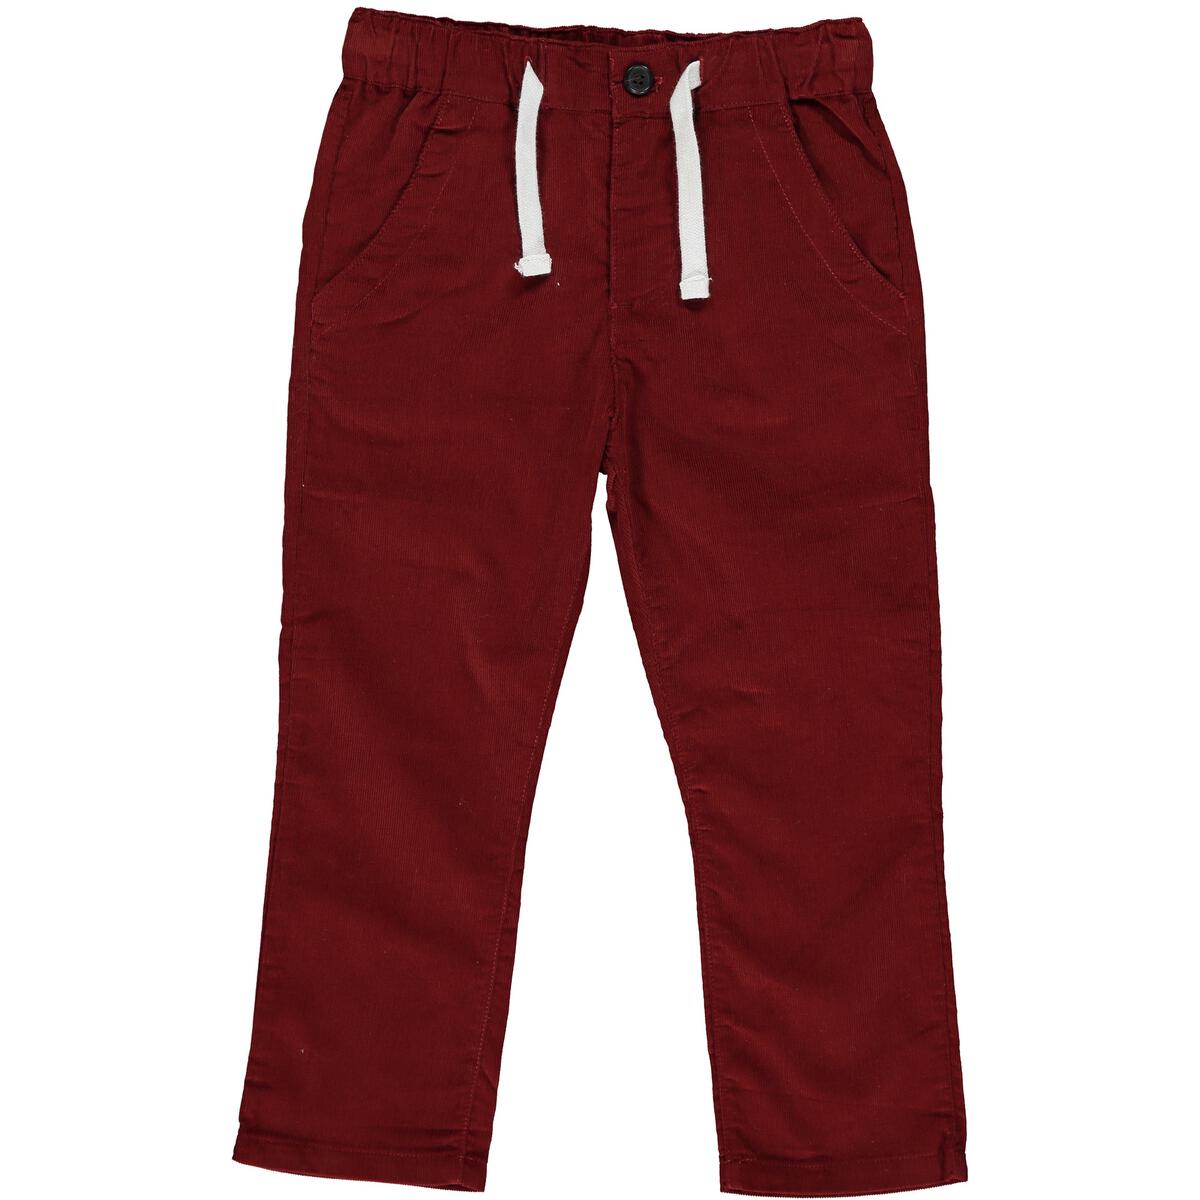 Me & Henry - Deep Red Cord Pants - kennethodaniel